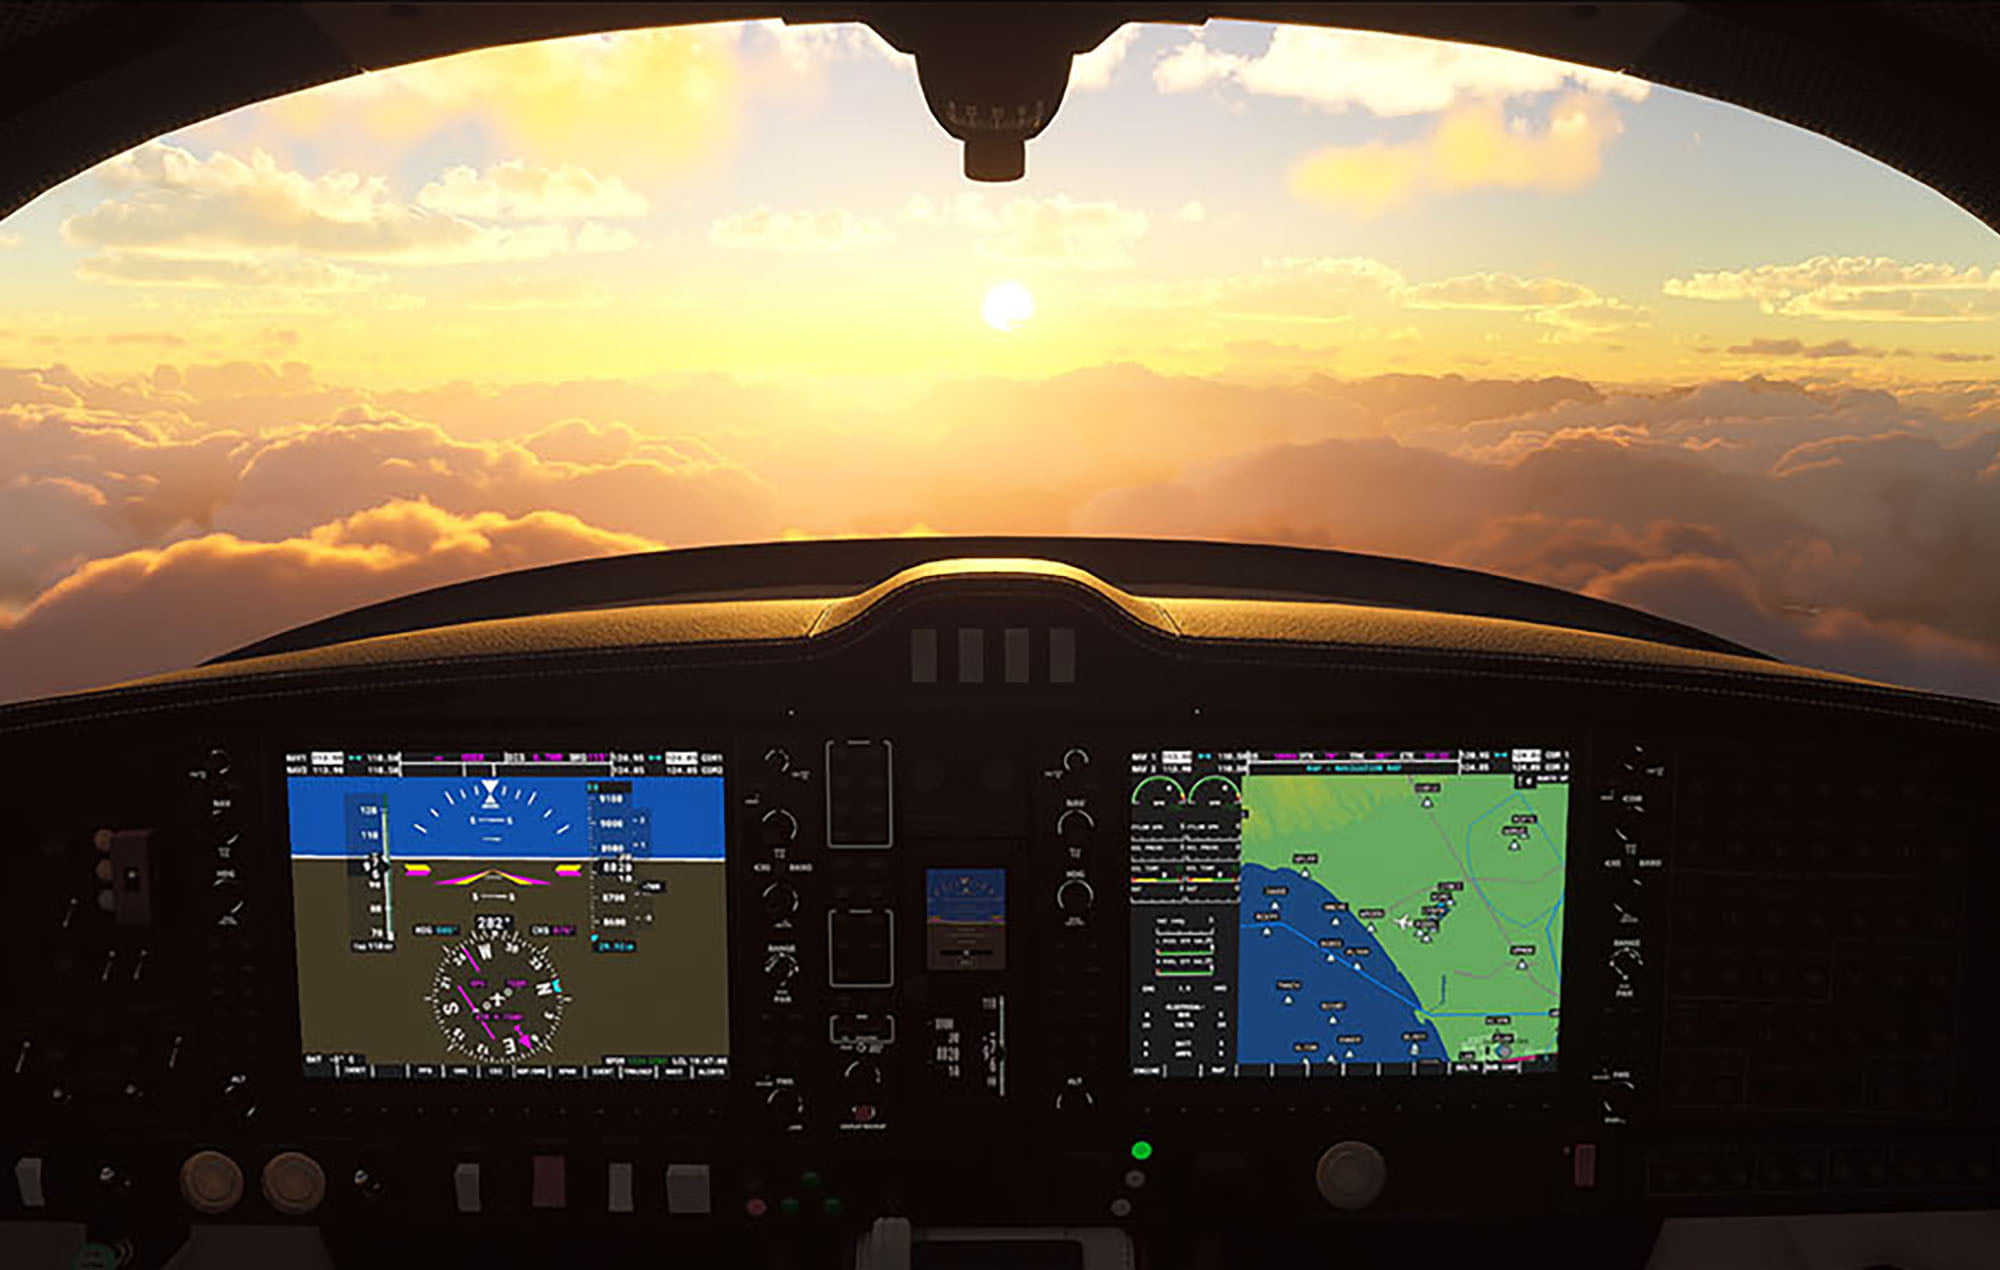 Microsoft Flight Simulator VR will be launched on December 22nd